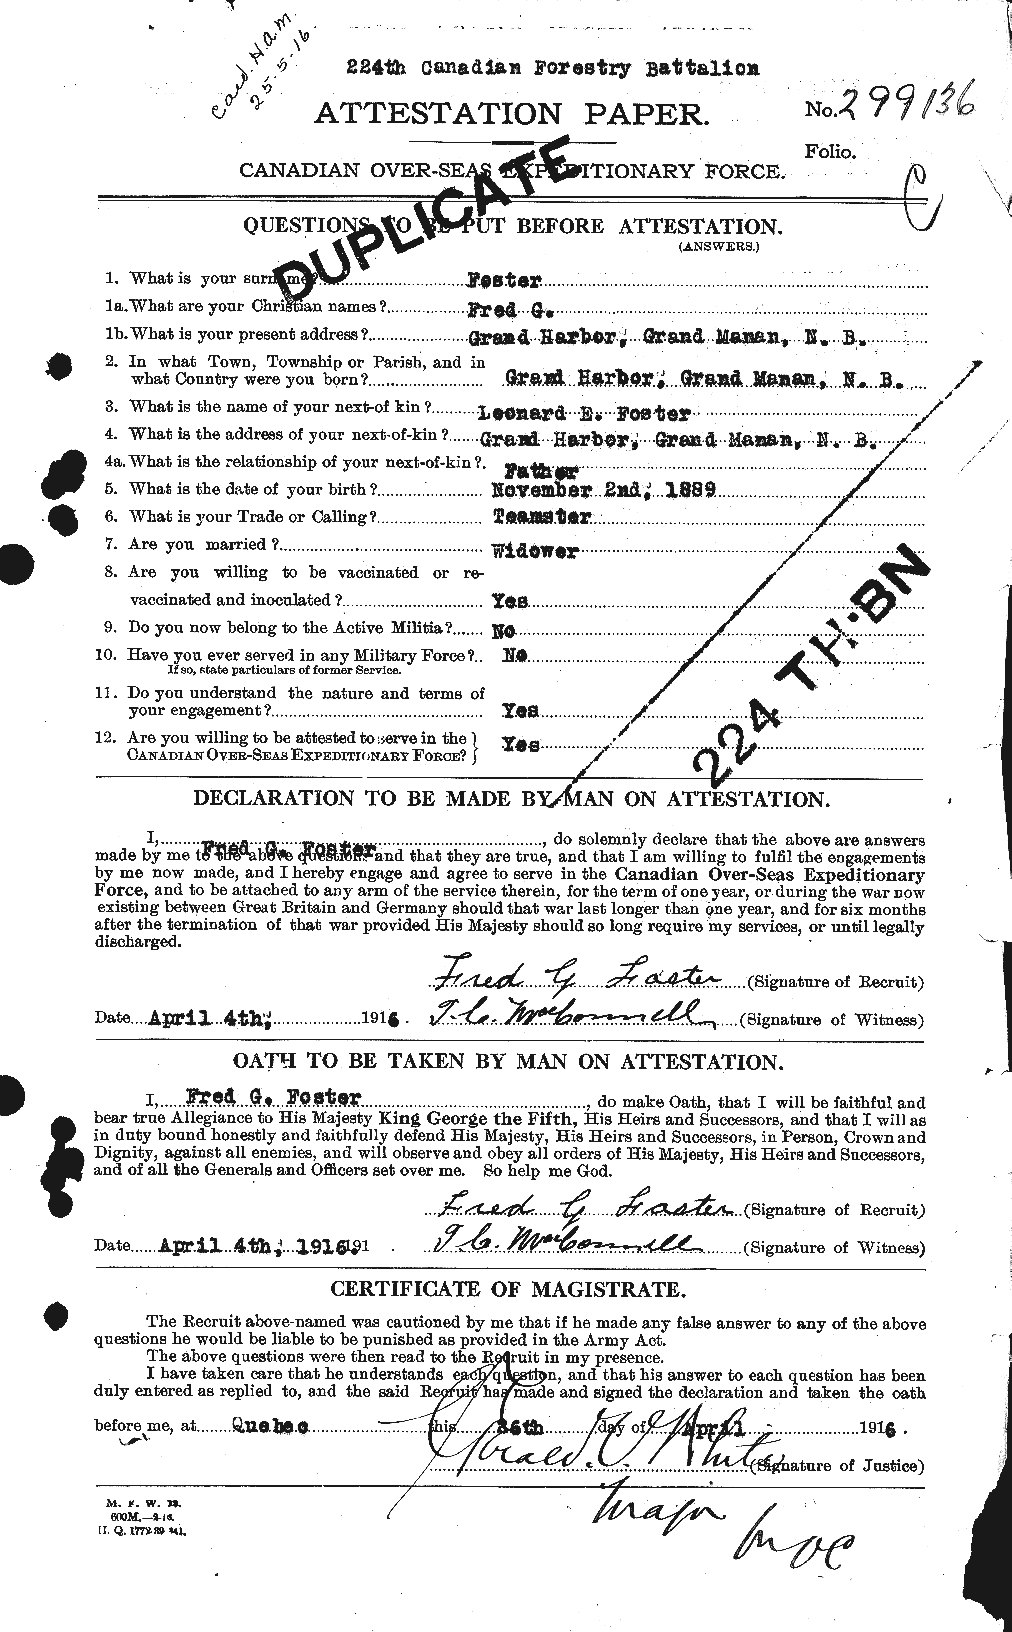 Personnel Records of the First World War - CEF 330639a